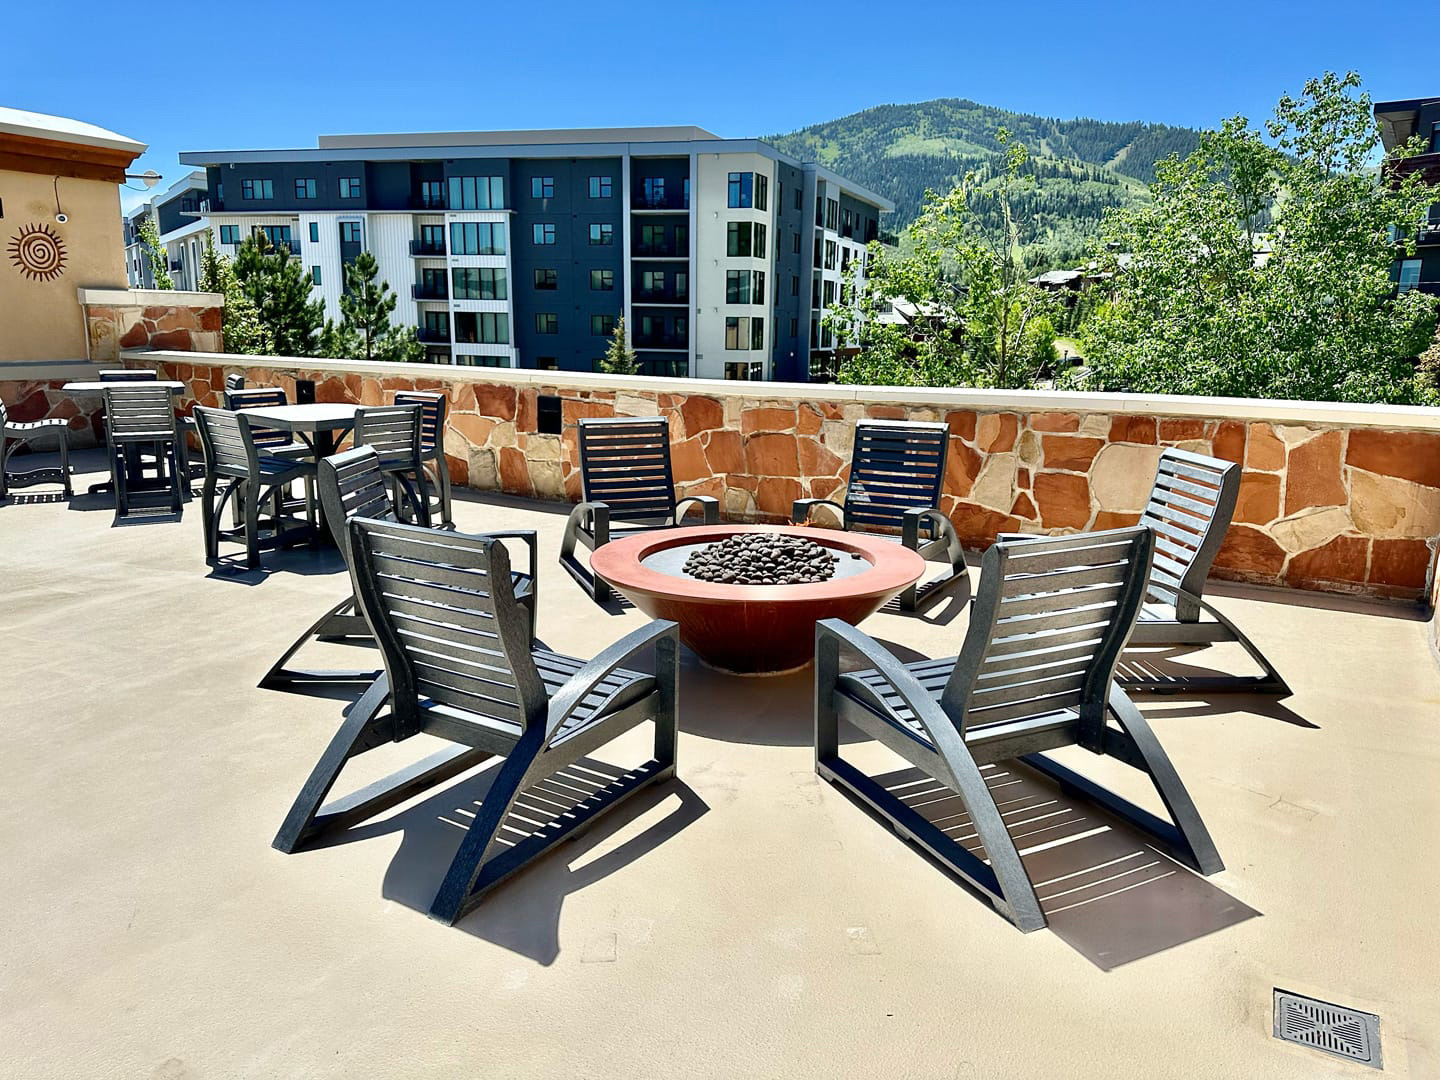 Skybridge fire pit and tables